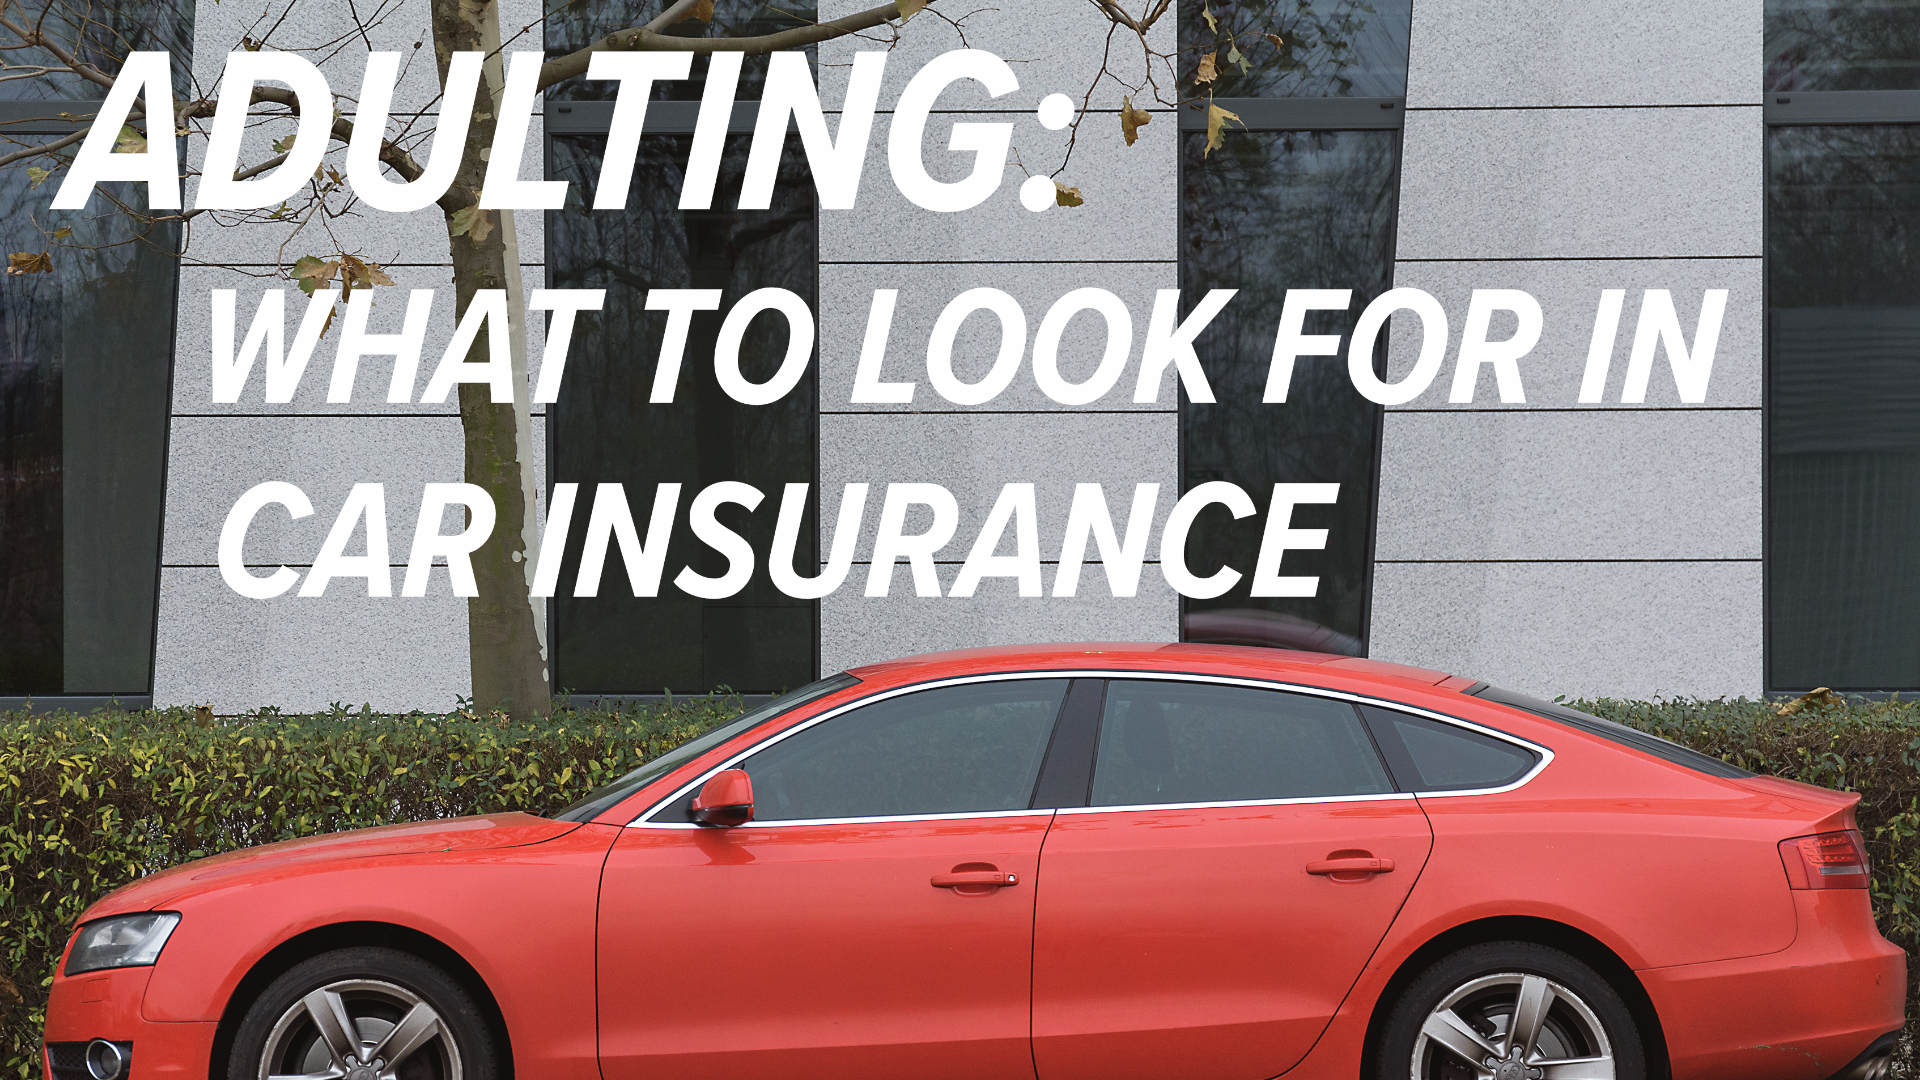 With so many options for car insurance coverage, how do you know which to pick? Dee Kerr with Total Retirements breaks it all down in Keep the Change.